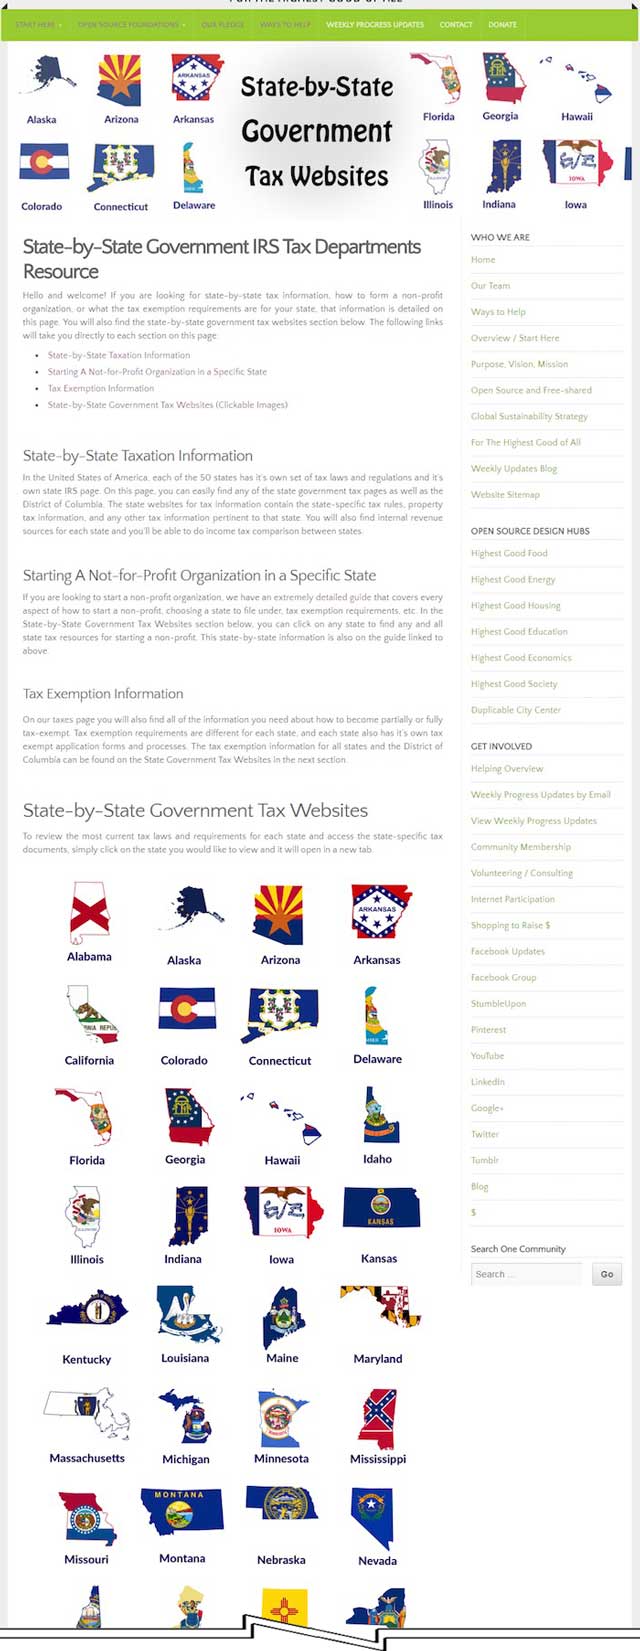 In addition to this we finished working on the new and standalone state-by-state resource page for the US Departments of Taxation, creating a header image, performing final edits, and completing the SEO information and sharing it. You can see this page here.